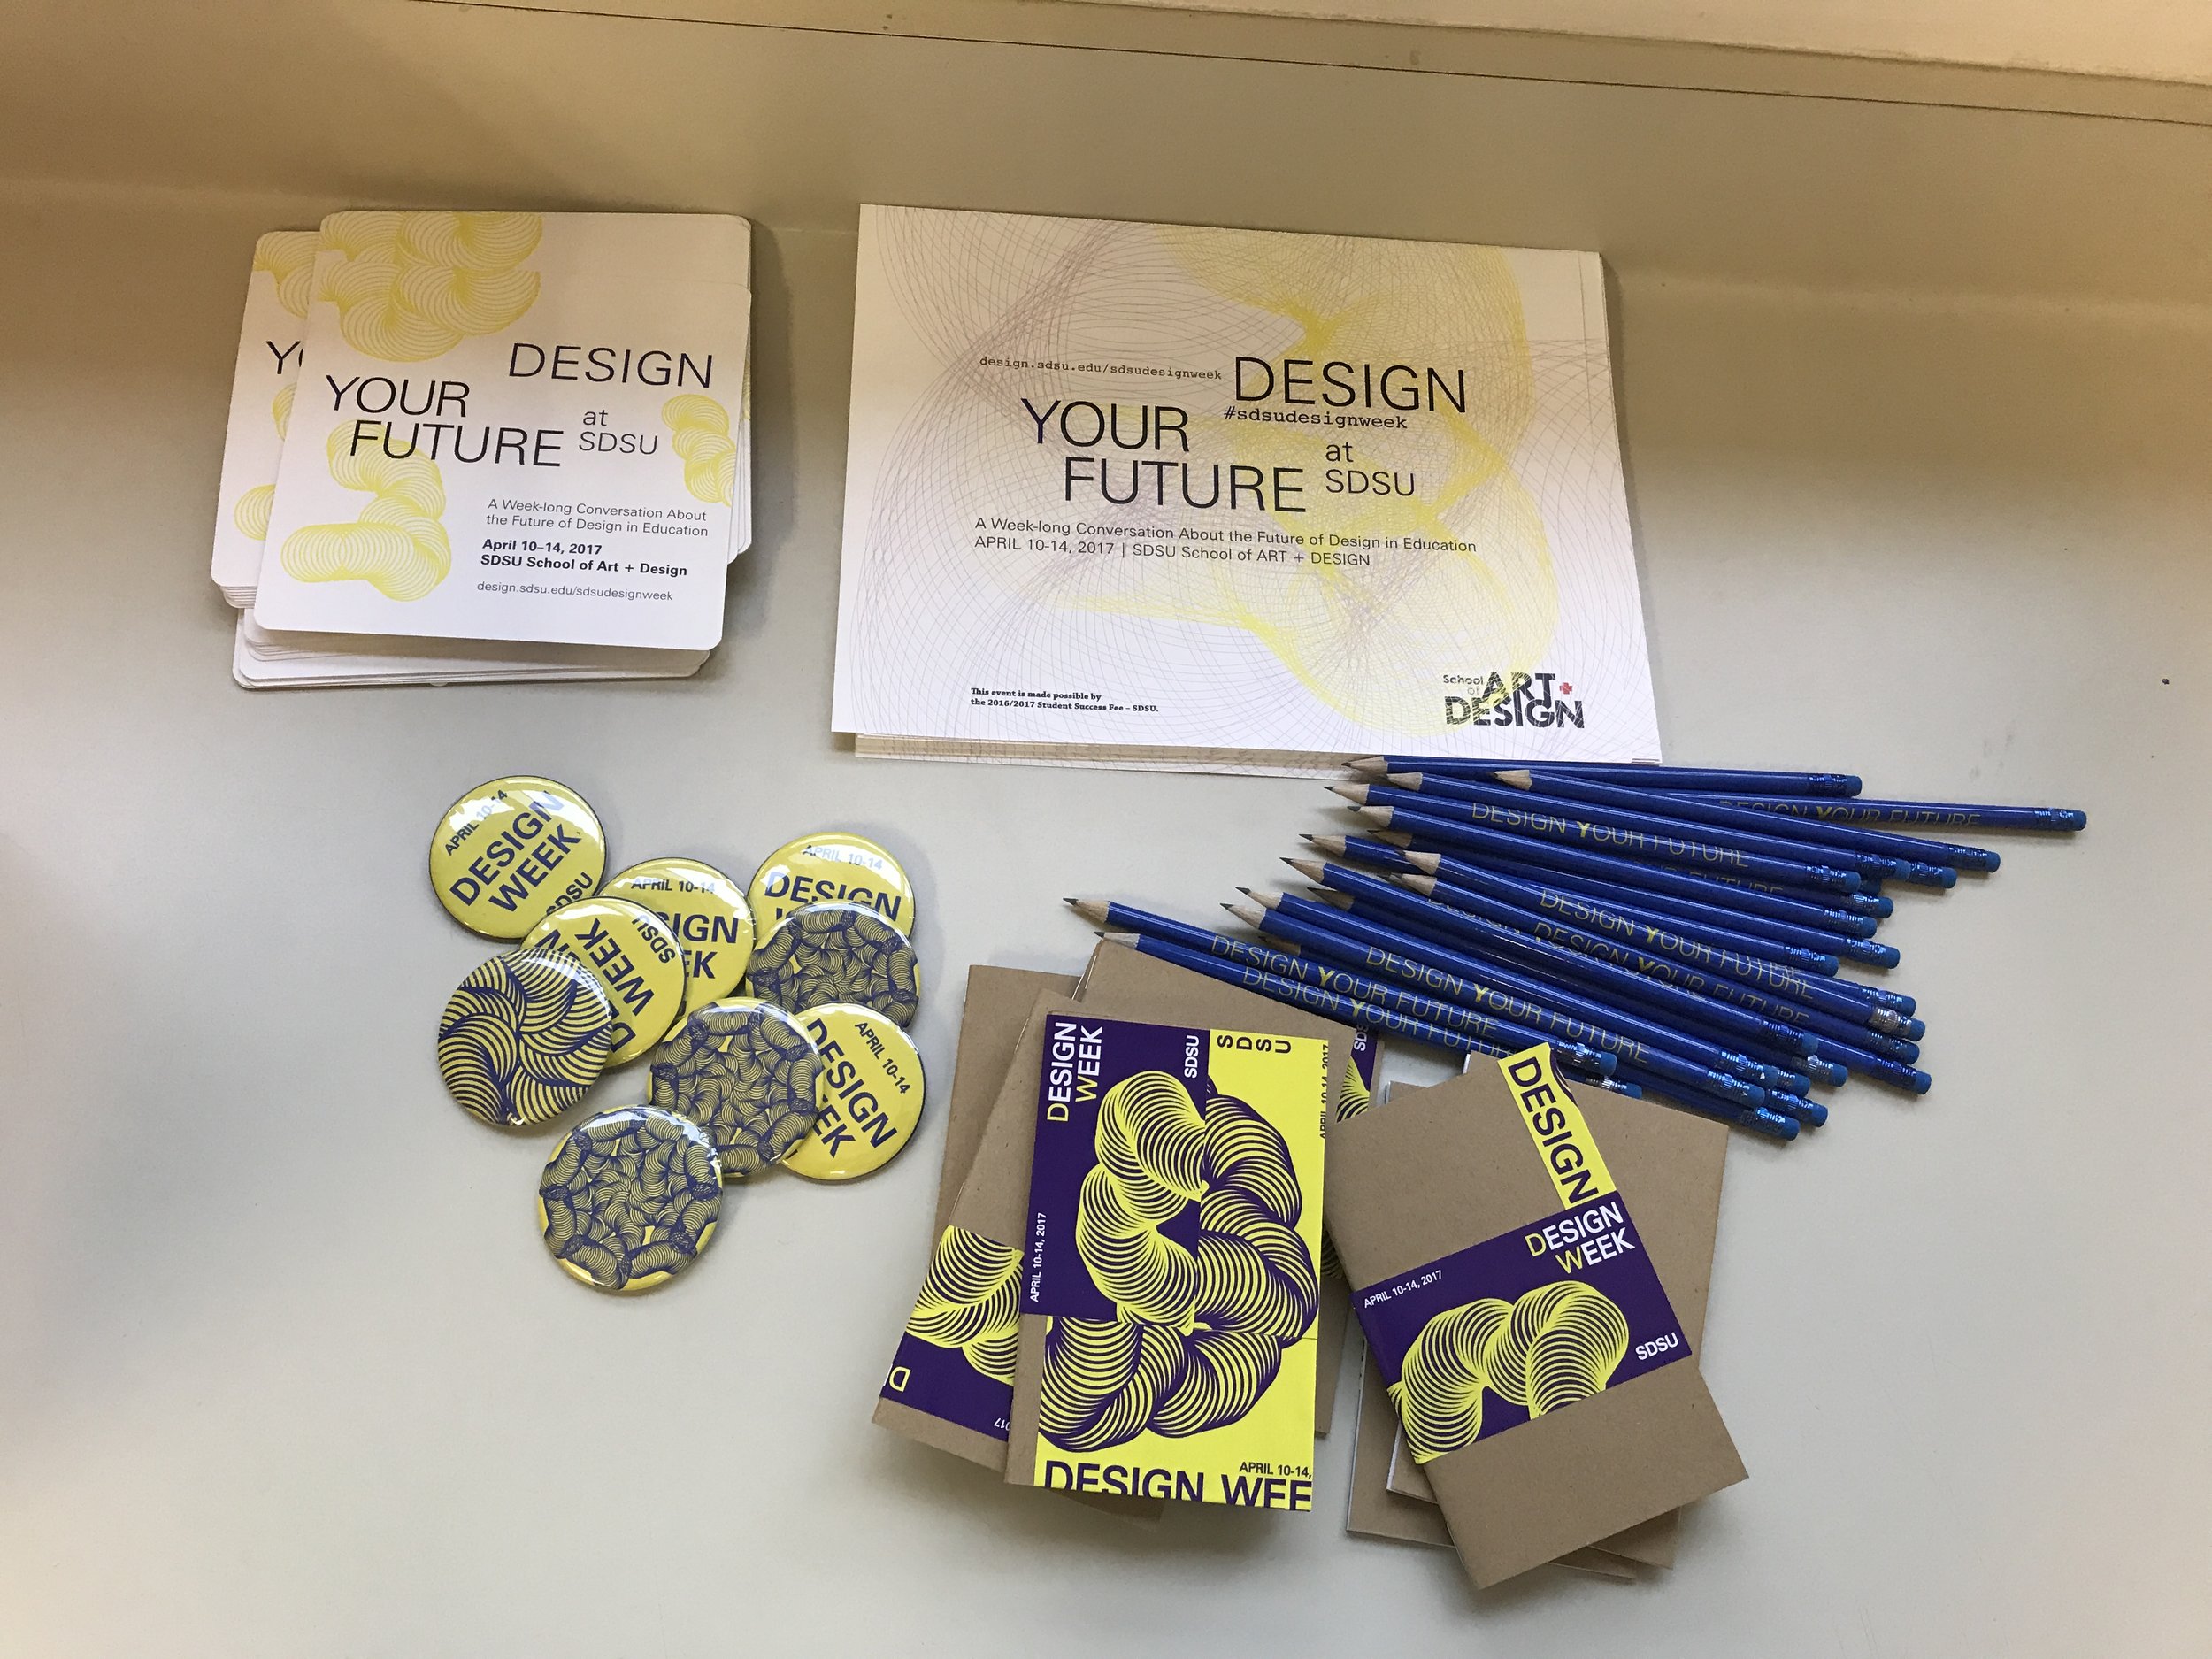  Collaborative design collateral consisting of stickers, pencils, notebooks, and a program. 